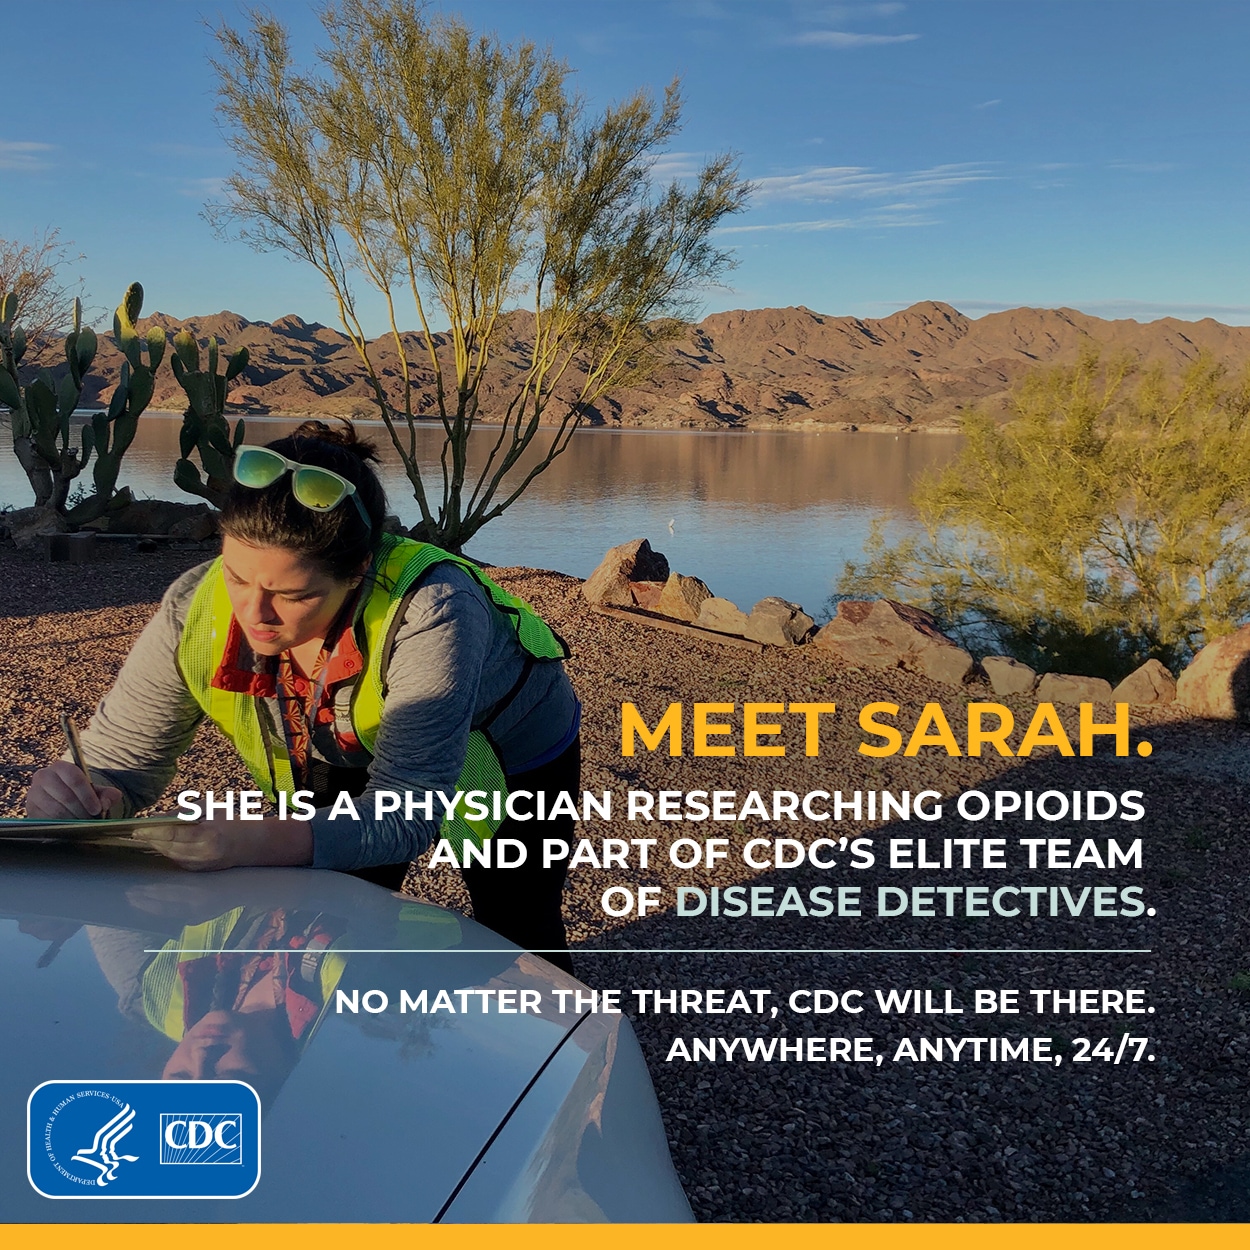 Meet Sarah.  She is a physiician researching opioids and part of CDC's elite team of disease detectives.